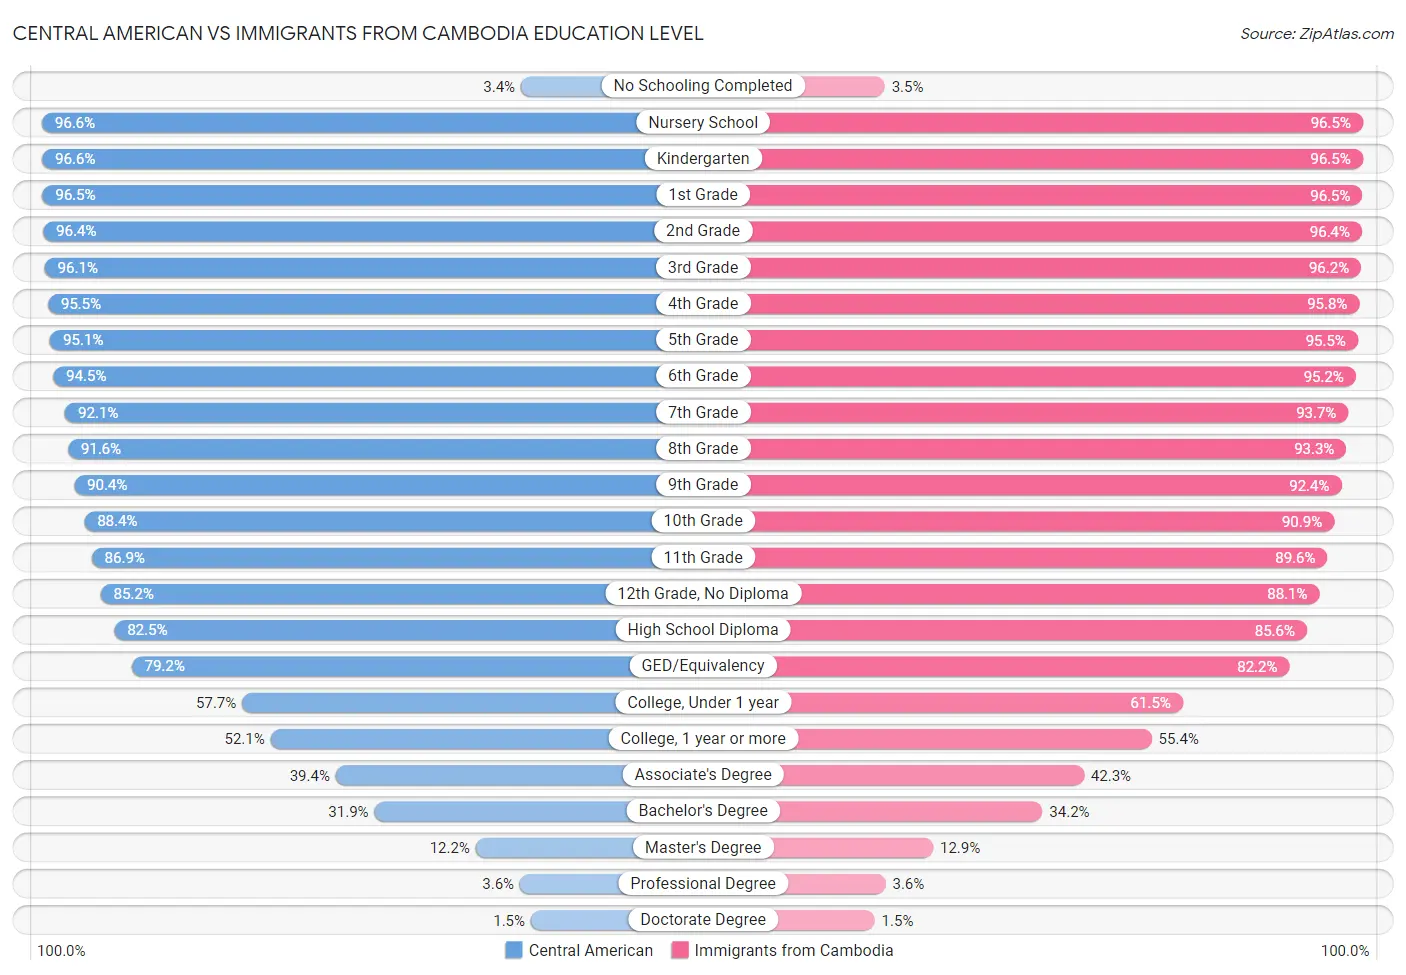 Central American vs Immigrants from Cambodia Education Level